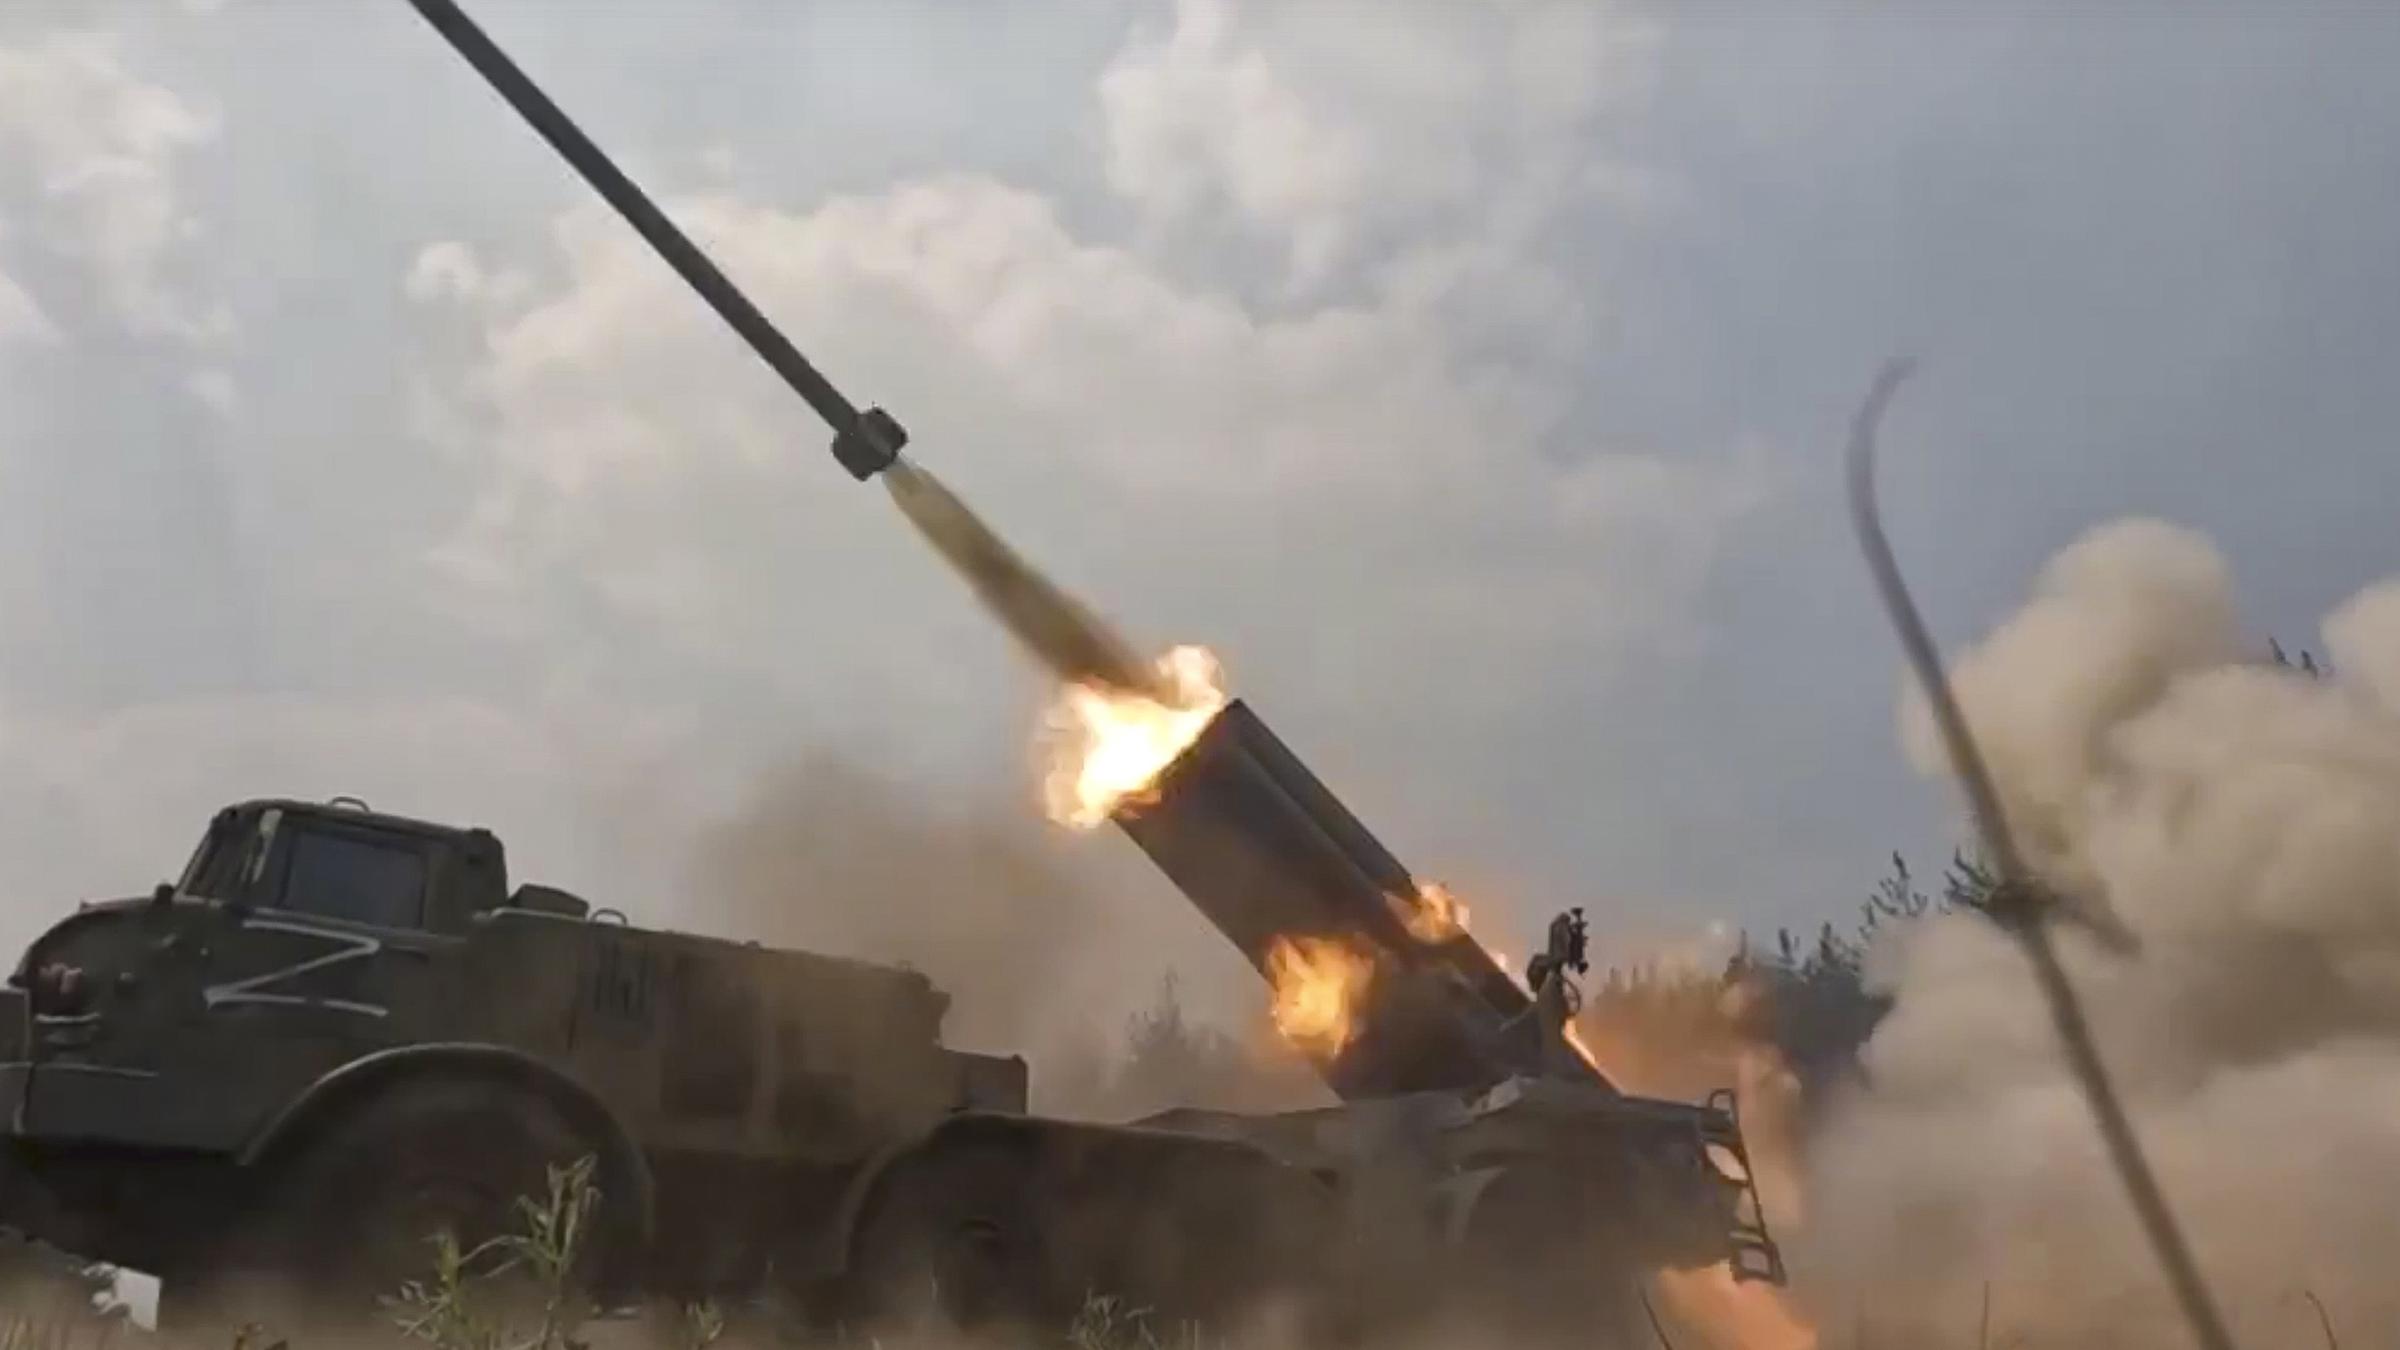 Russian military multiple rocket launcher launches rockets at Ukrainian troops at an undisclosed location.